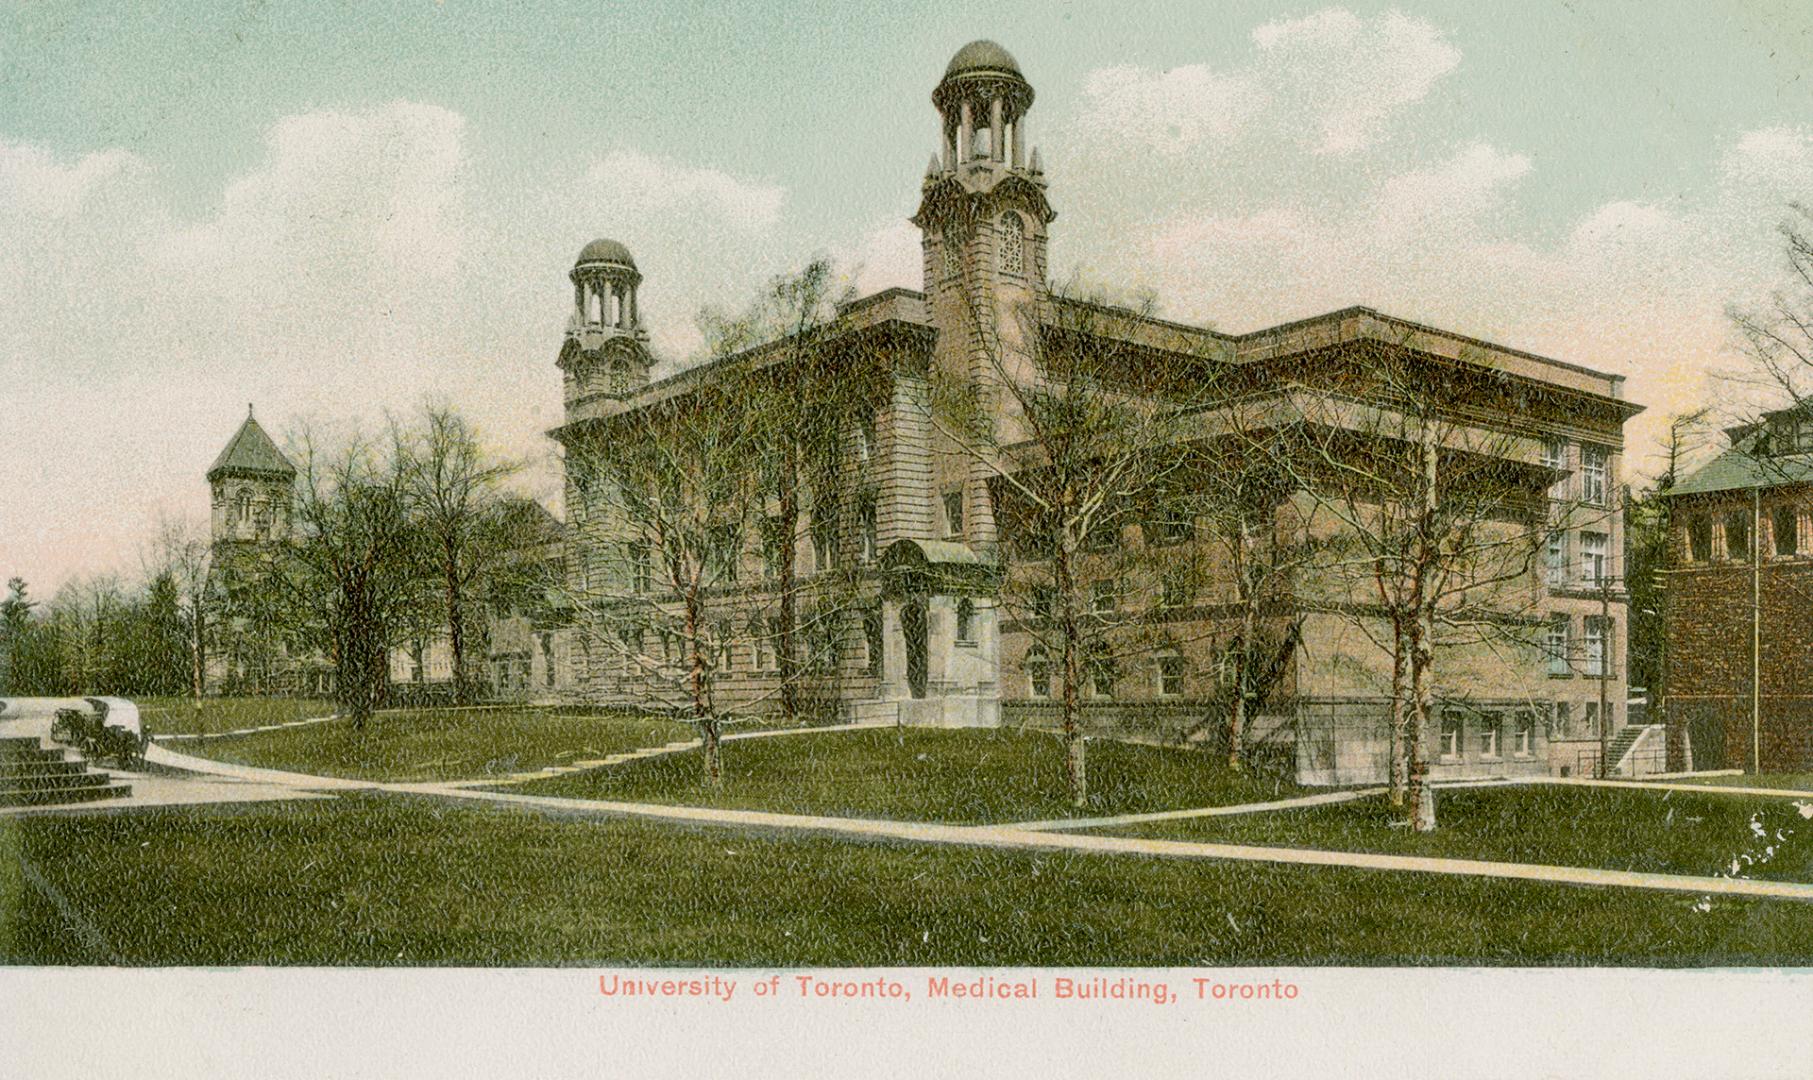 Colorized photograph of a large building with two towers.